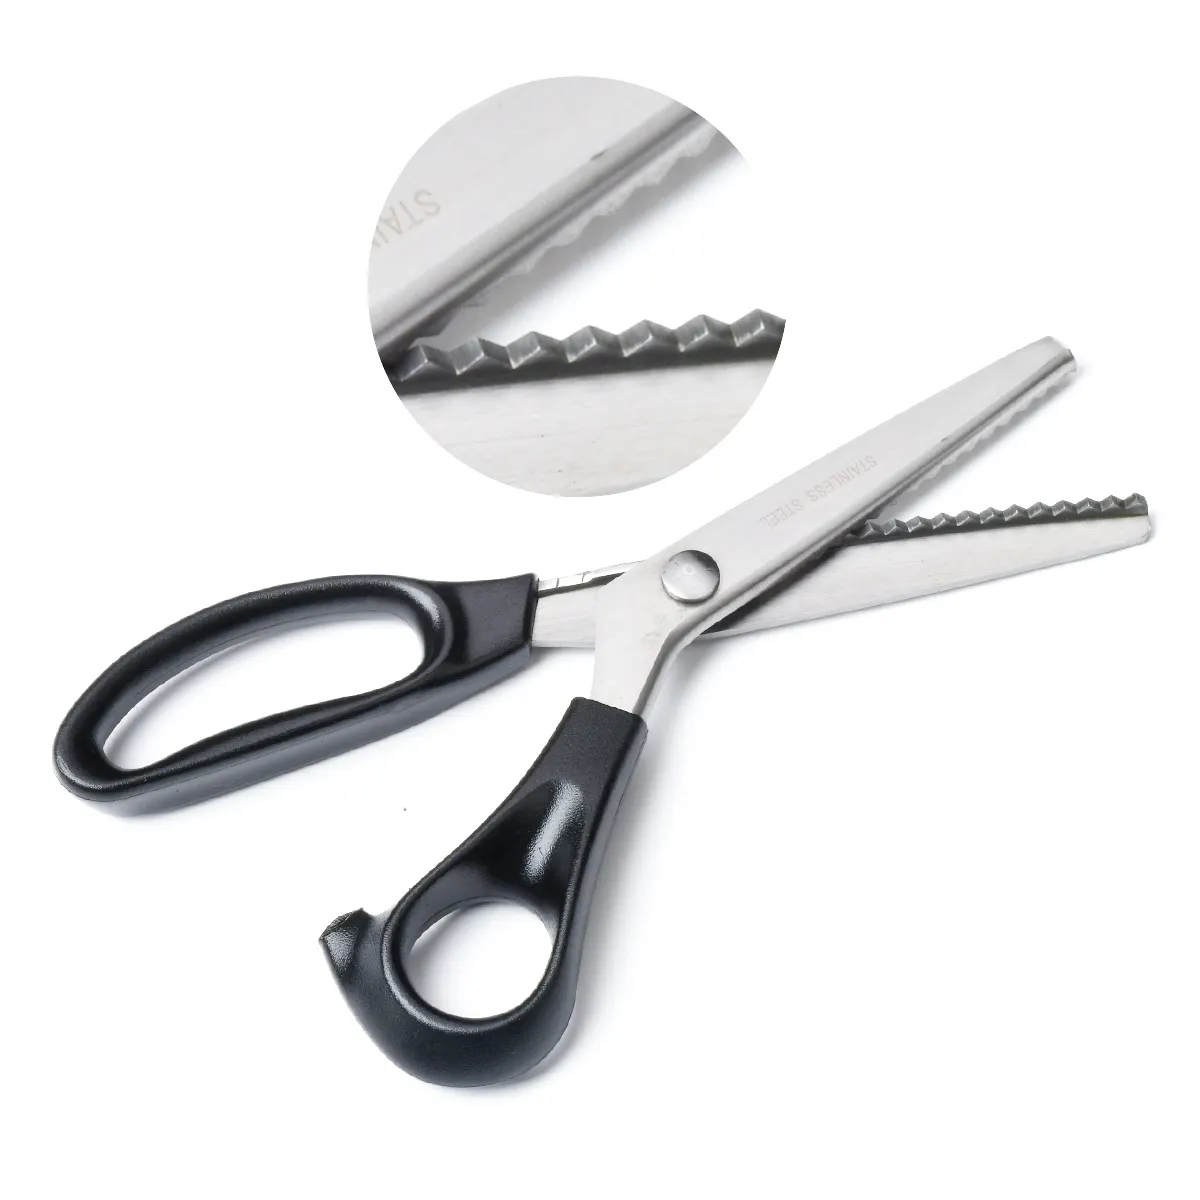 Low discount stainless steel clipping scissors Tailors sew scissors